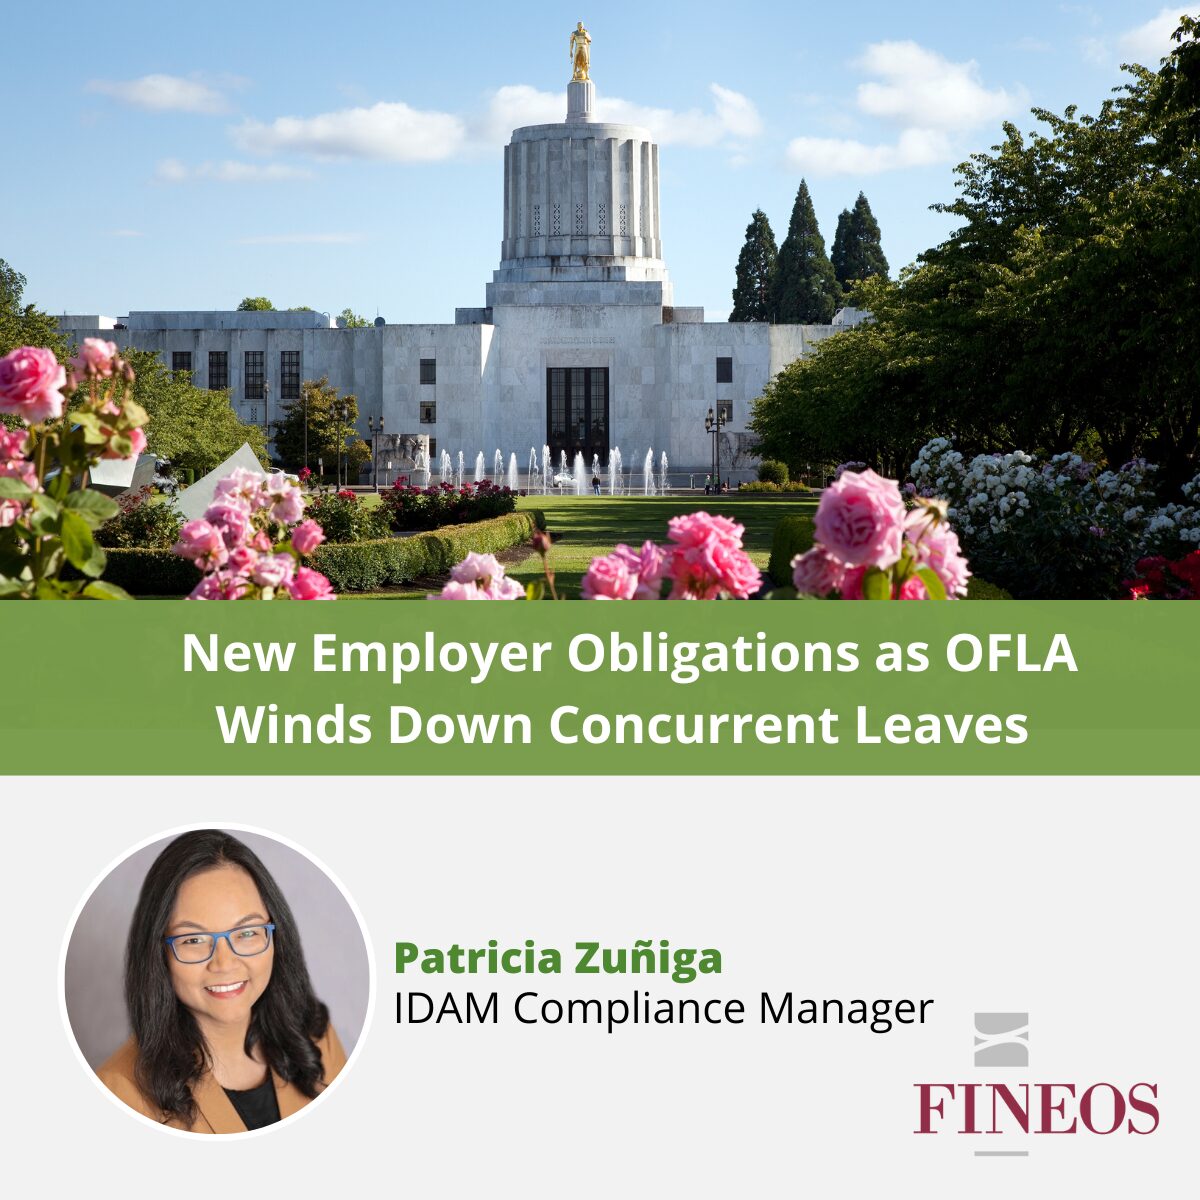 New Employer Obligations as OFLA Winds Down Concurrent Leaves